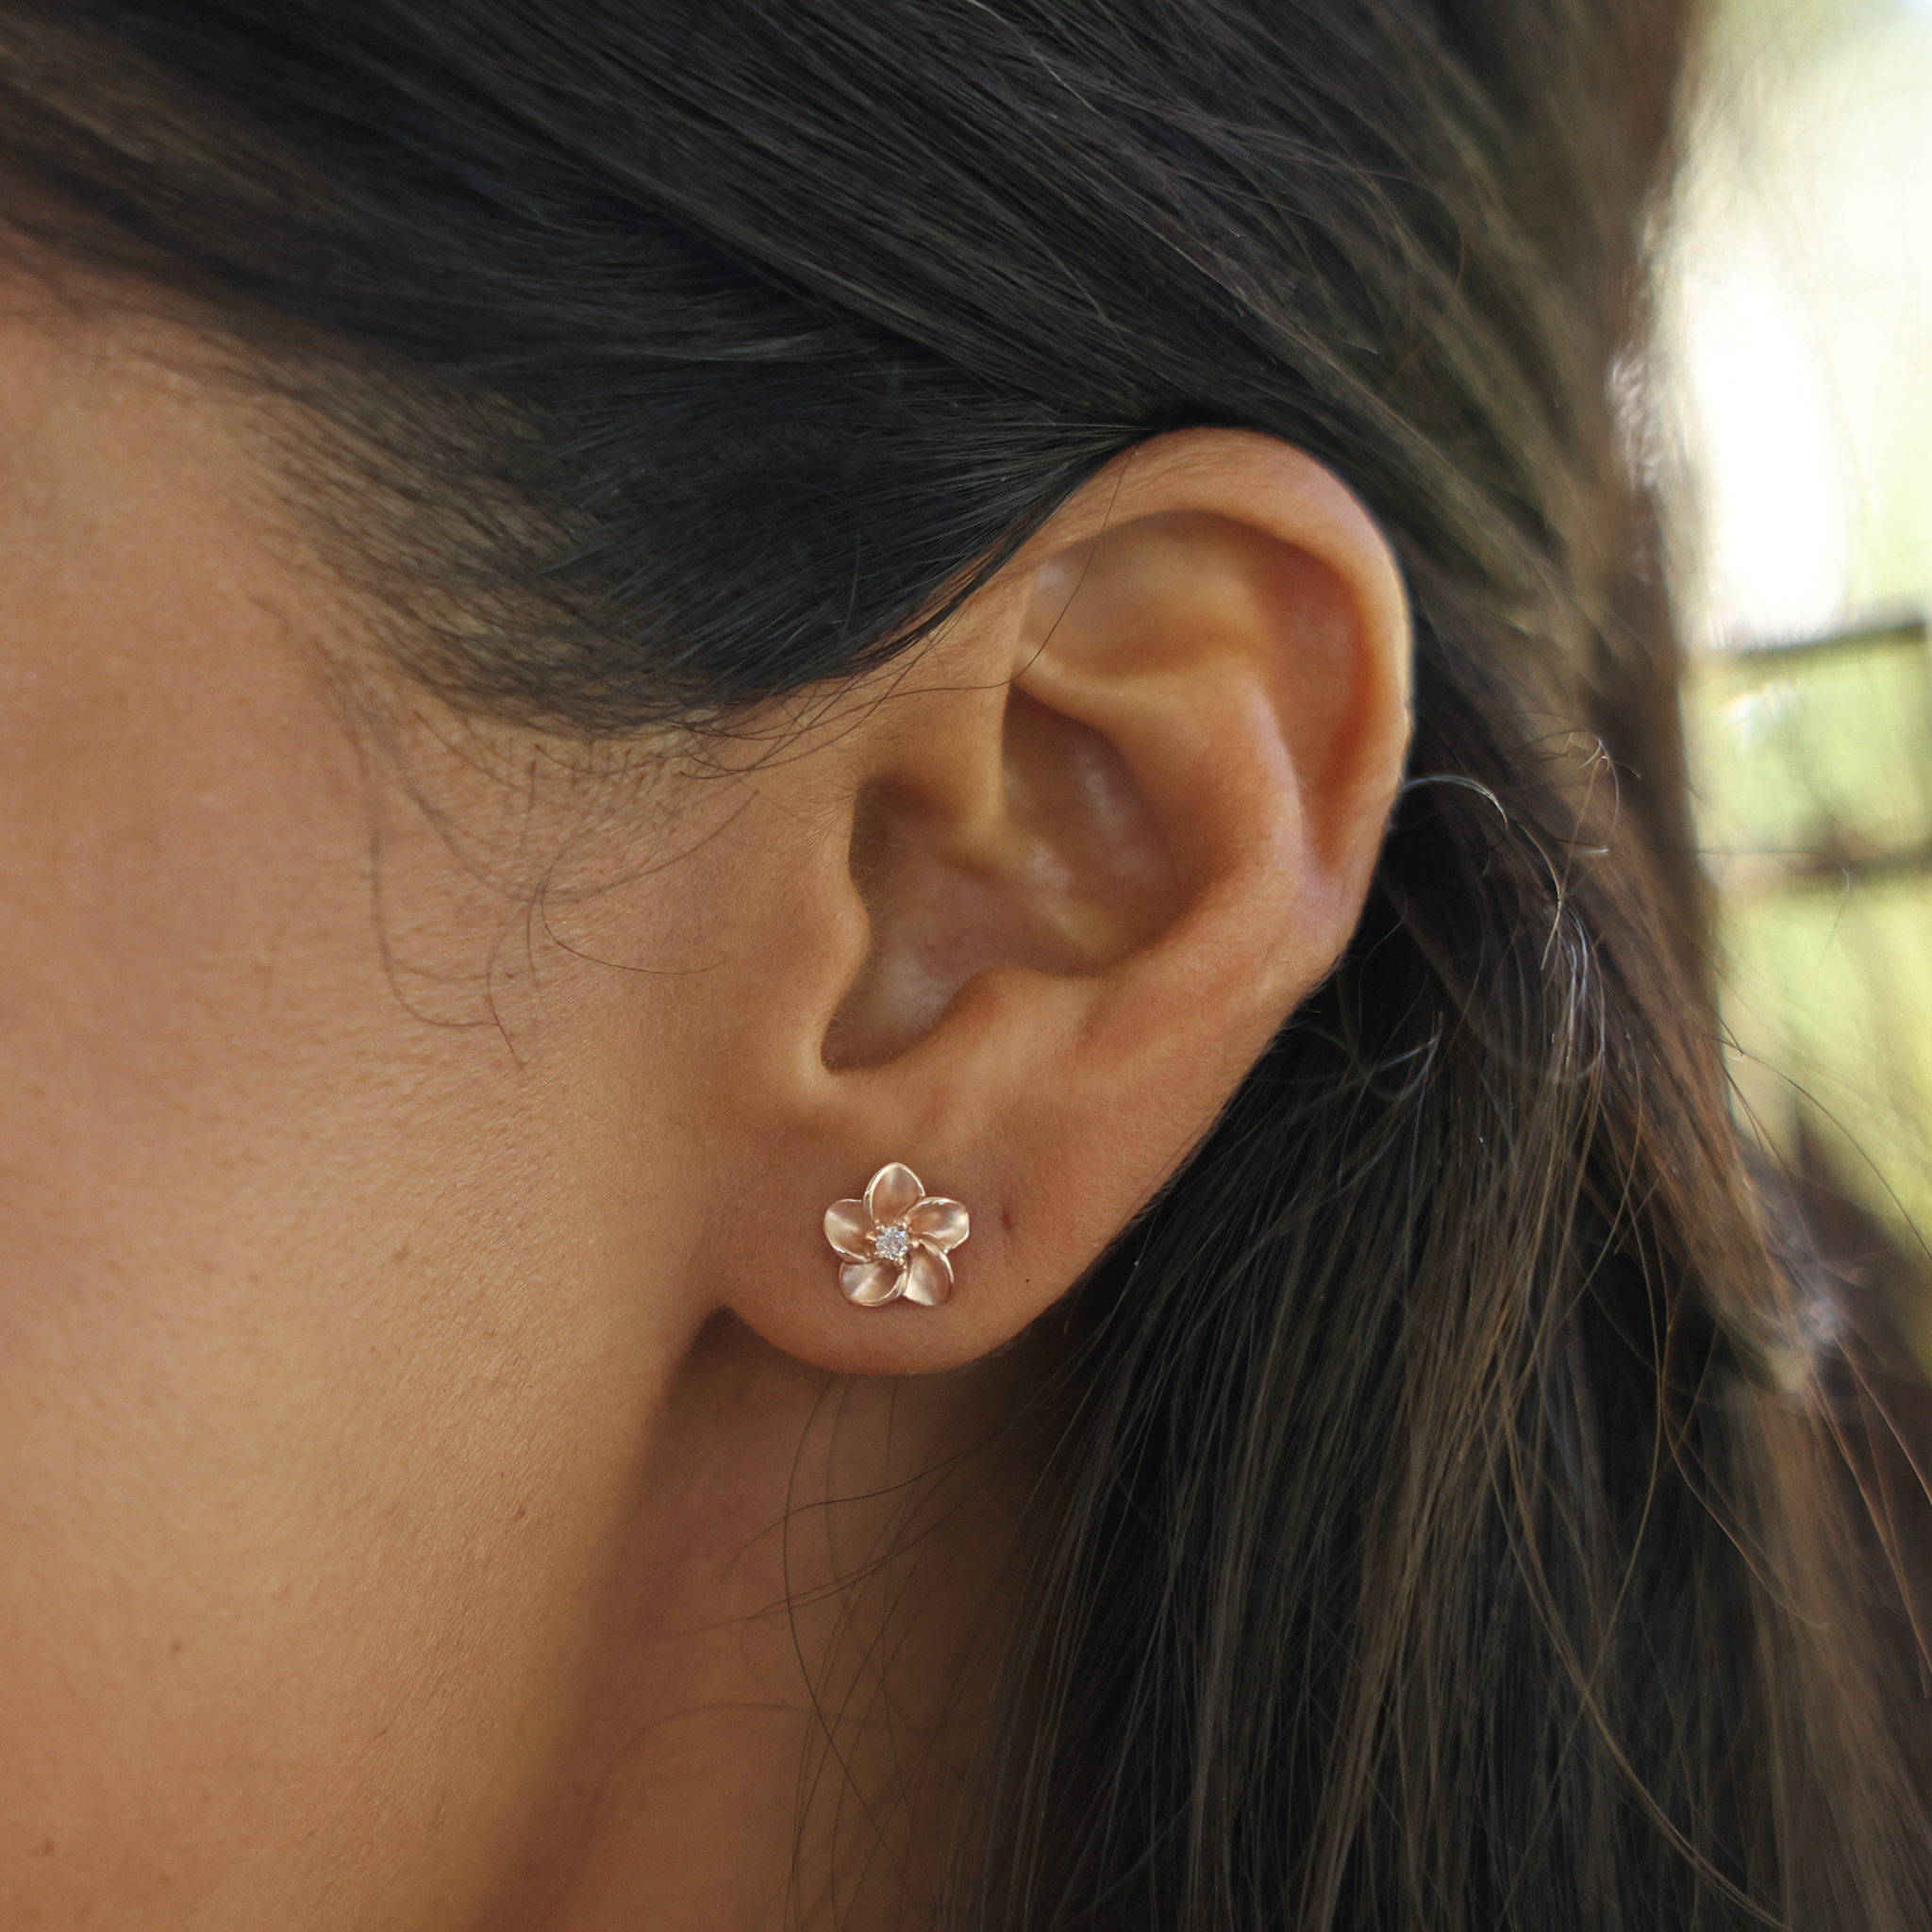 Plumeria Earrings in Rose Gold with Diamonds - 8mm